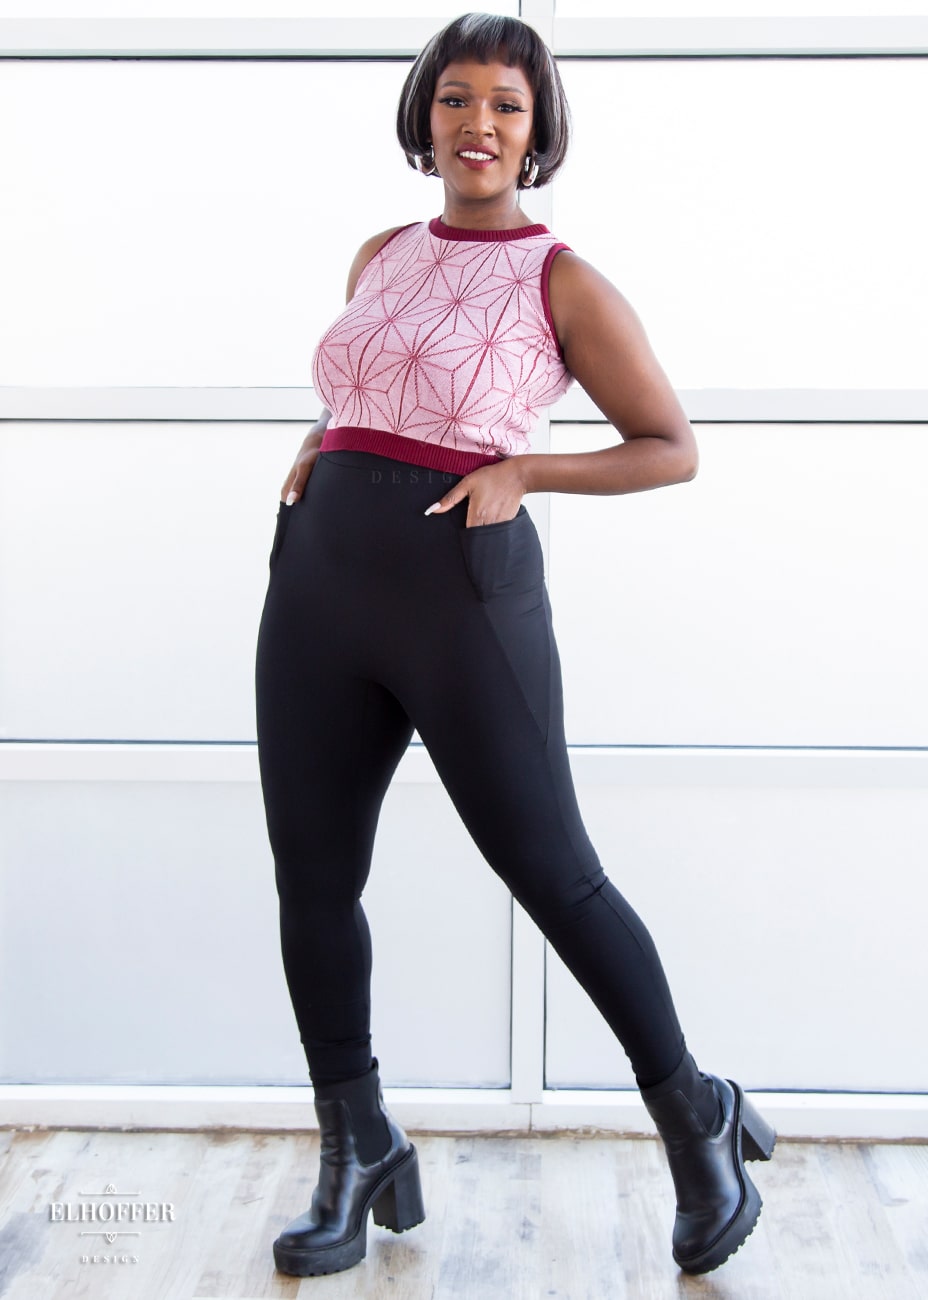 Lynsi, a medium dark skinned model with short dark brown hair with white highlights, is wearing a pair of high waisted leggings with a seamless front and side seam pockets in black.